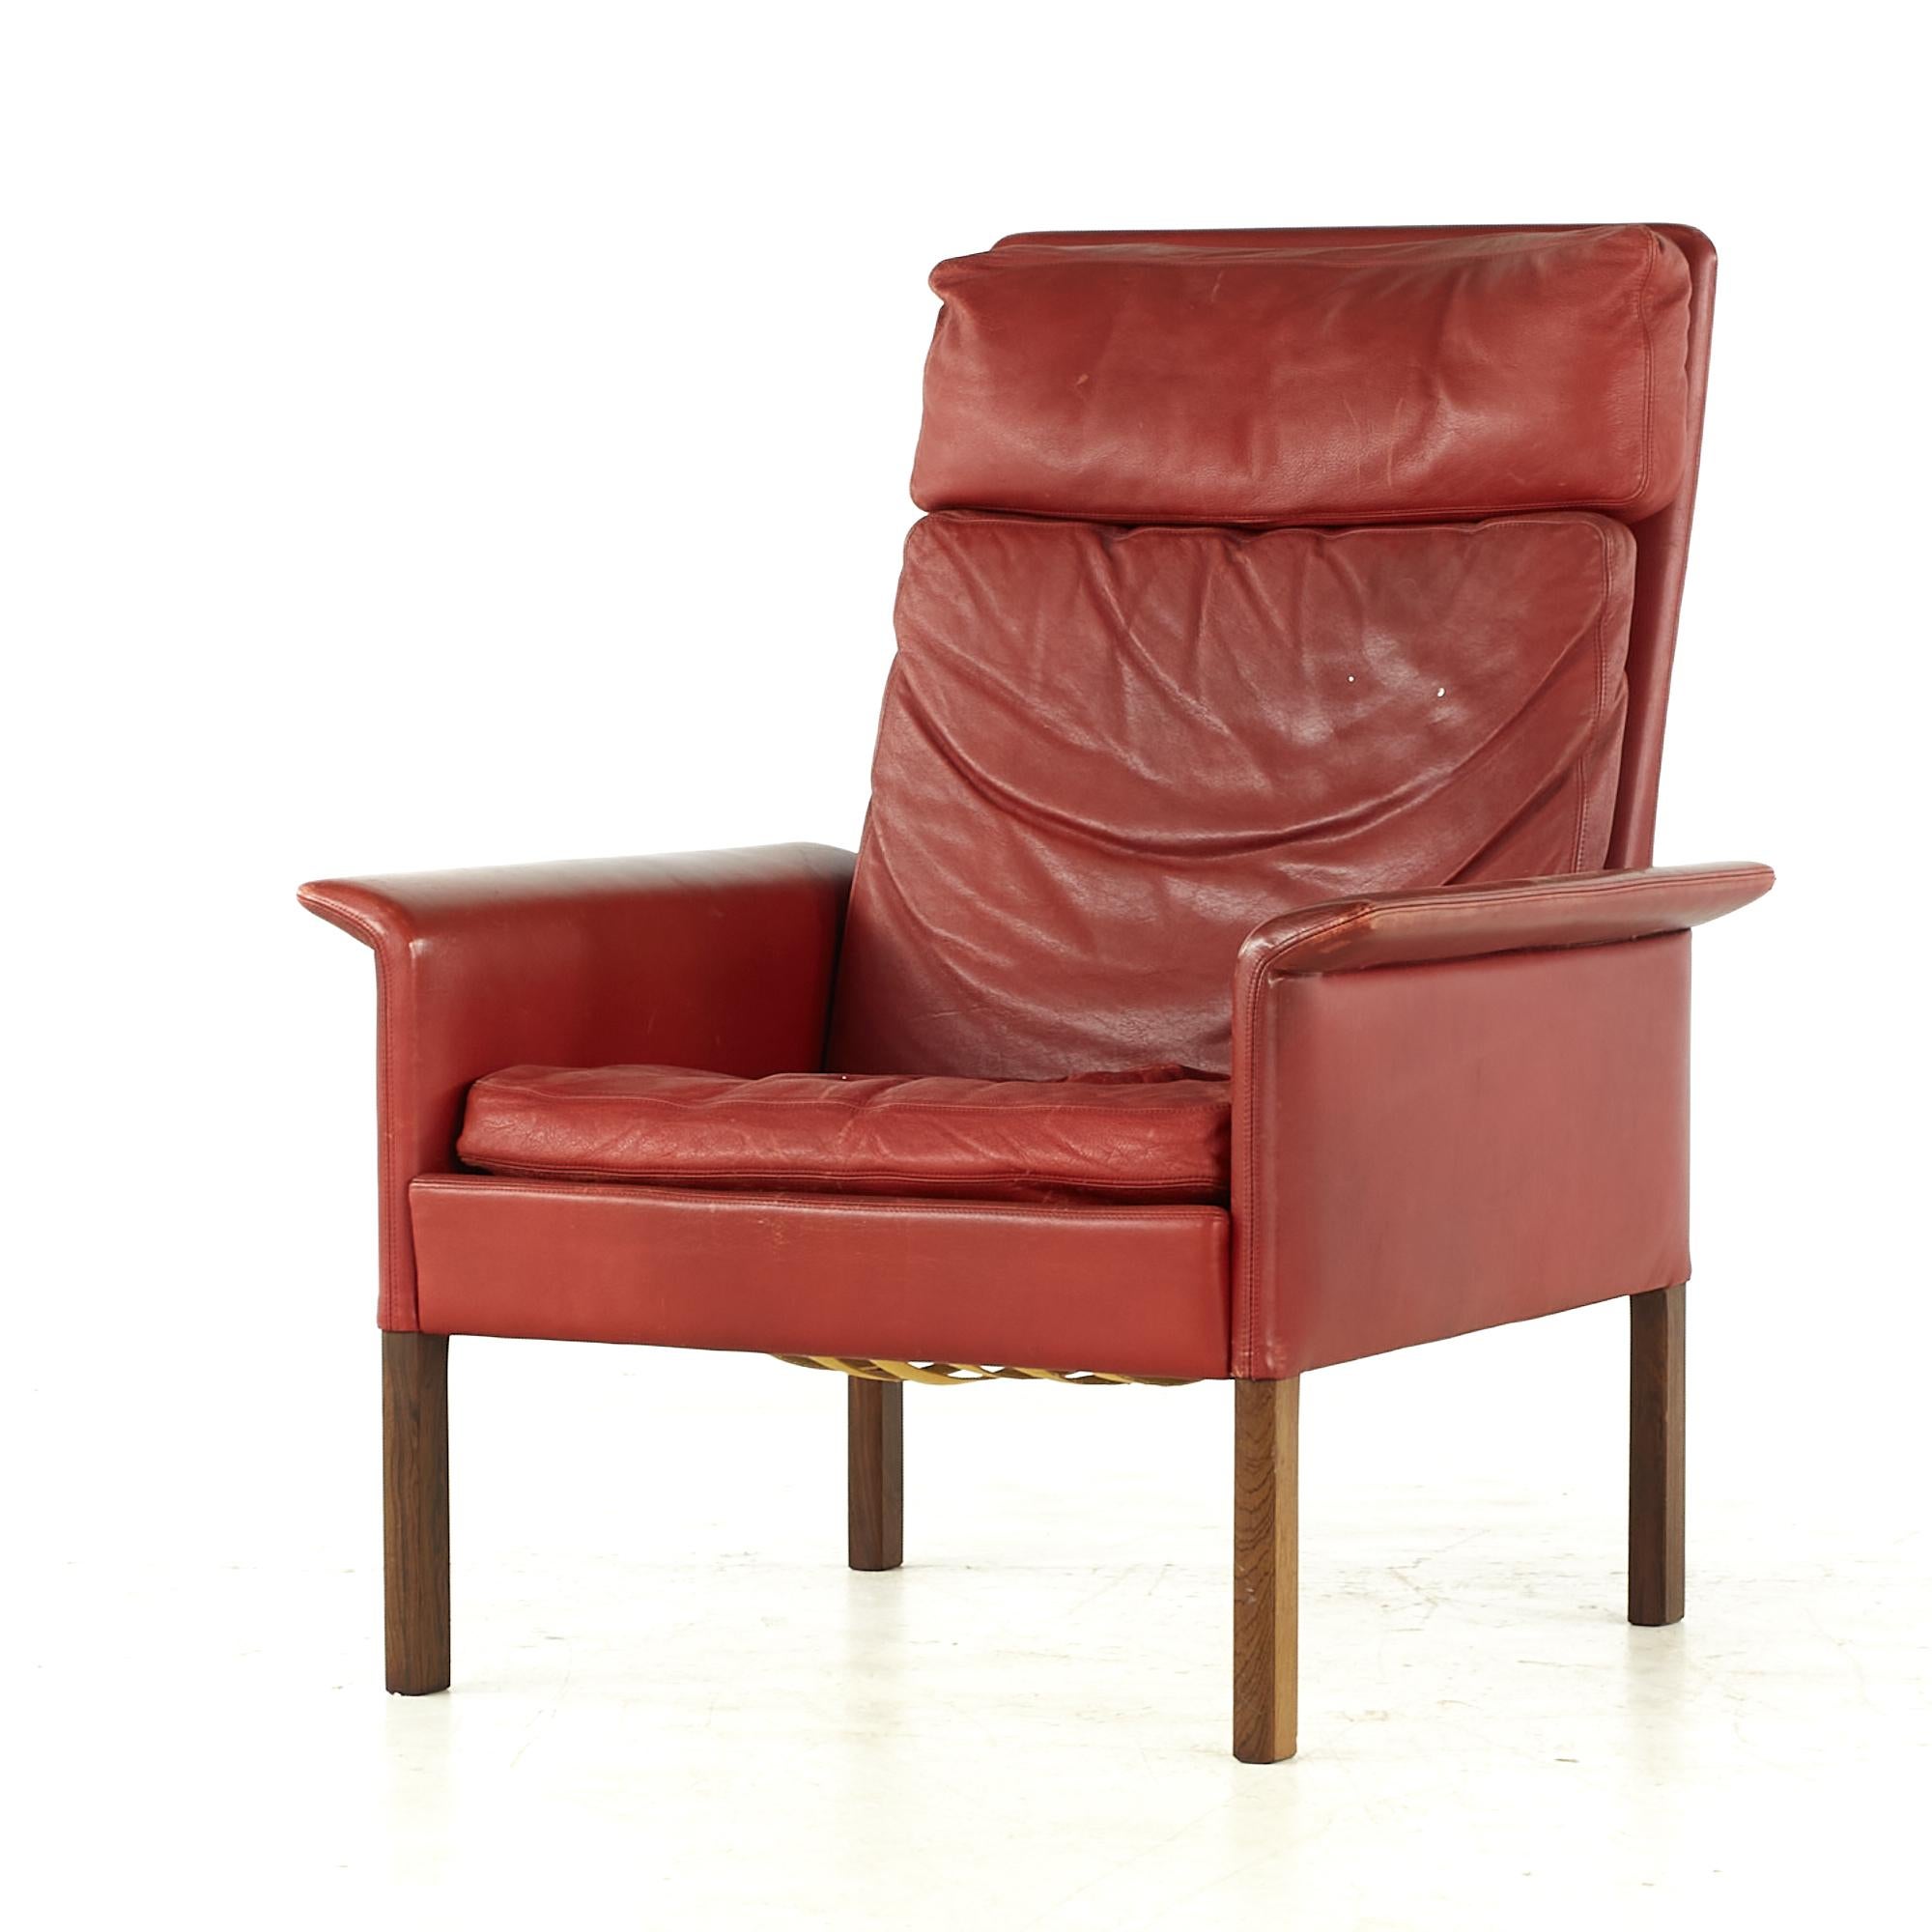 Hans Olsen Midcentury Danish Rosewood and Red Leather Chairs, Pair For Sale 1